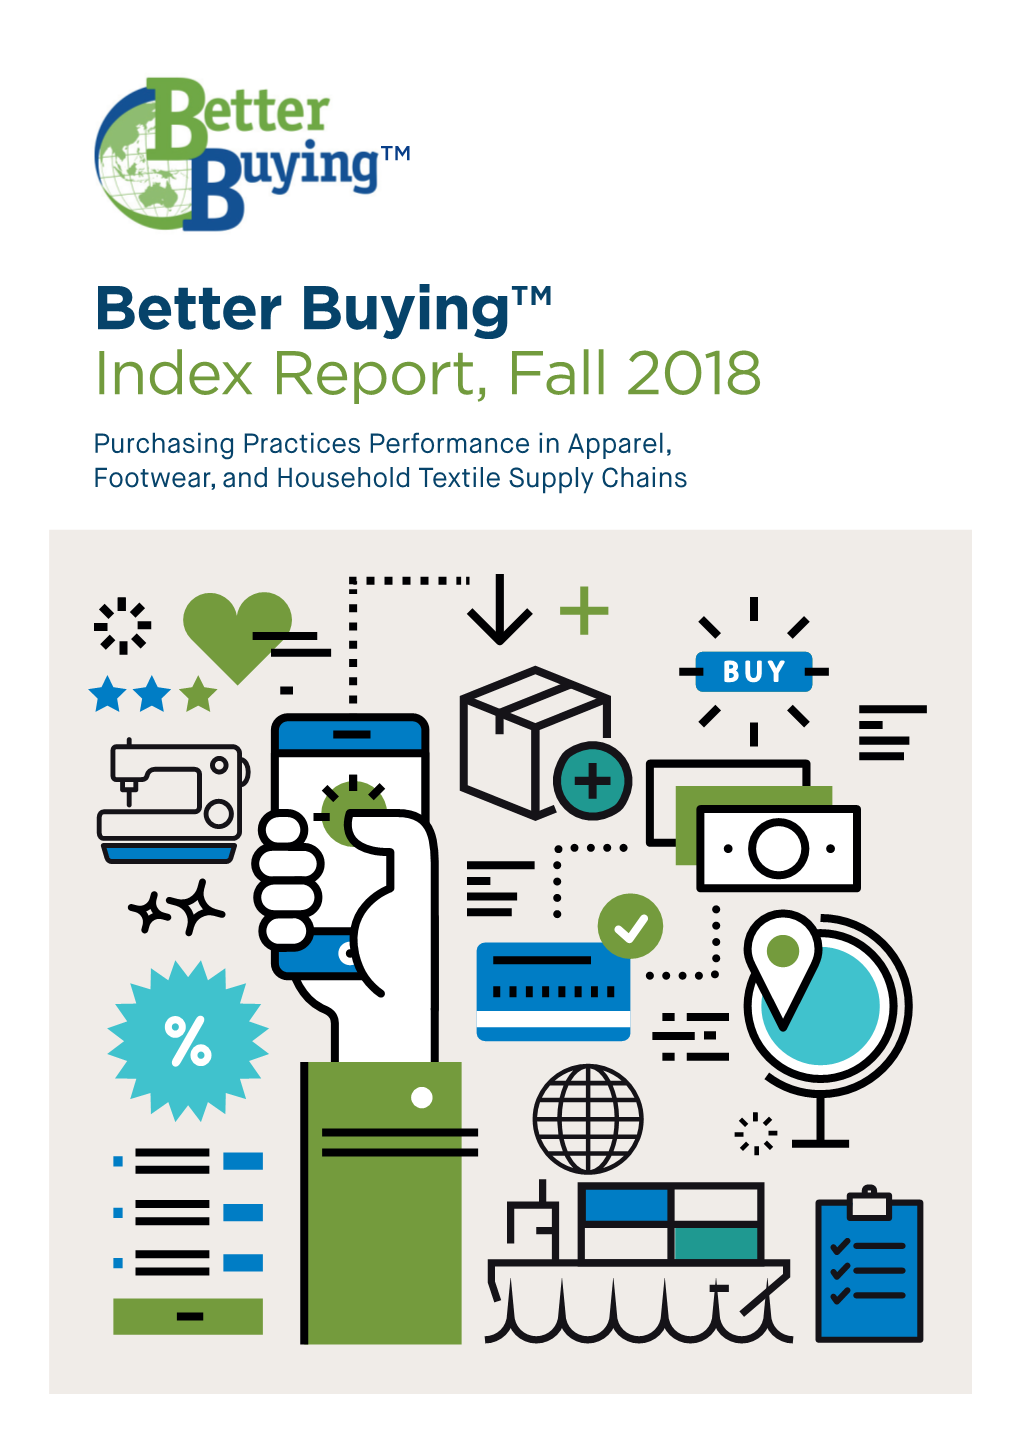 Better Buying™ Index Report, Fall 2018 Purchasing Practices Performance in Apparel, Footwear, and Household Textile Supply Chains